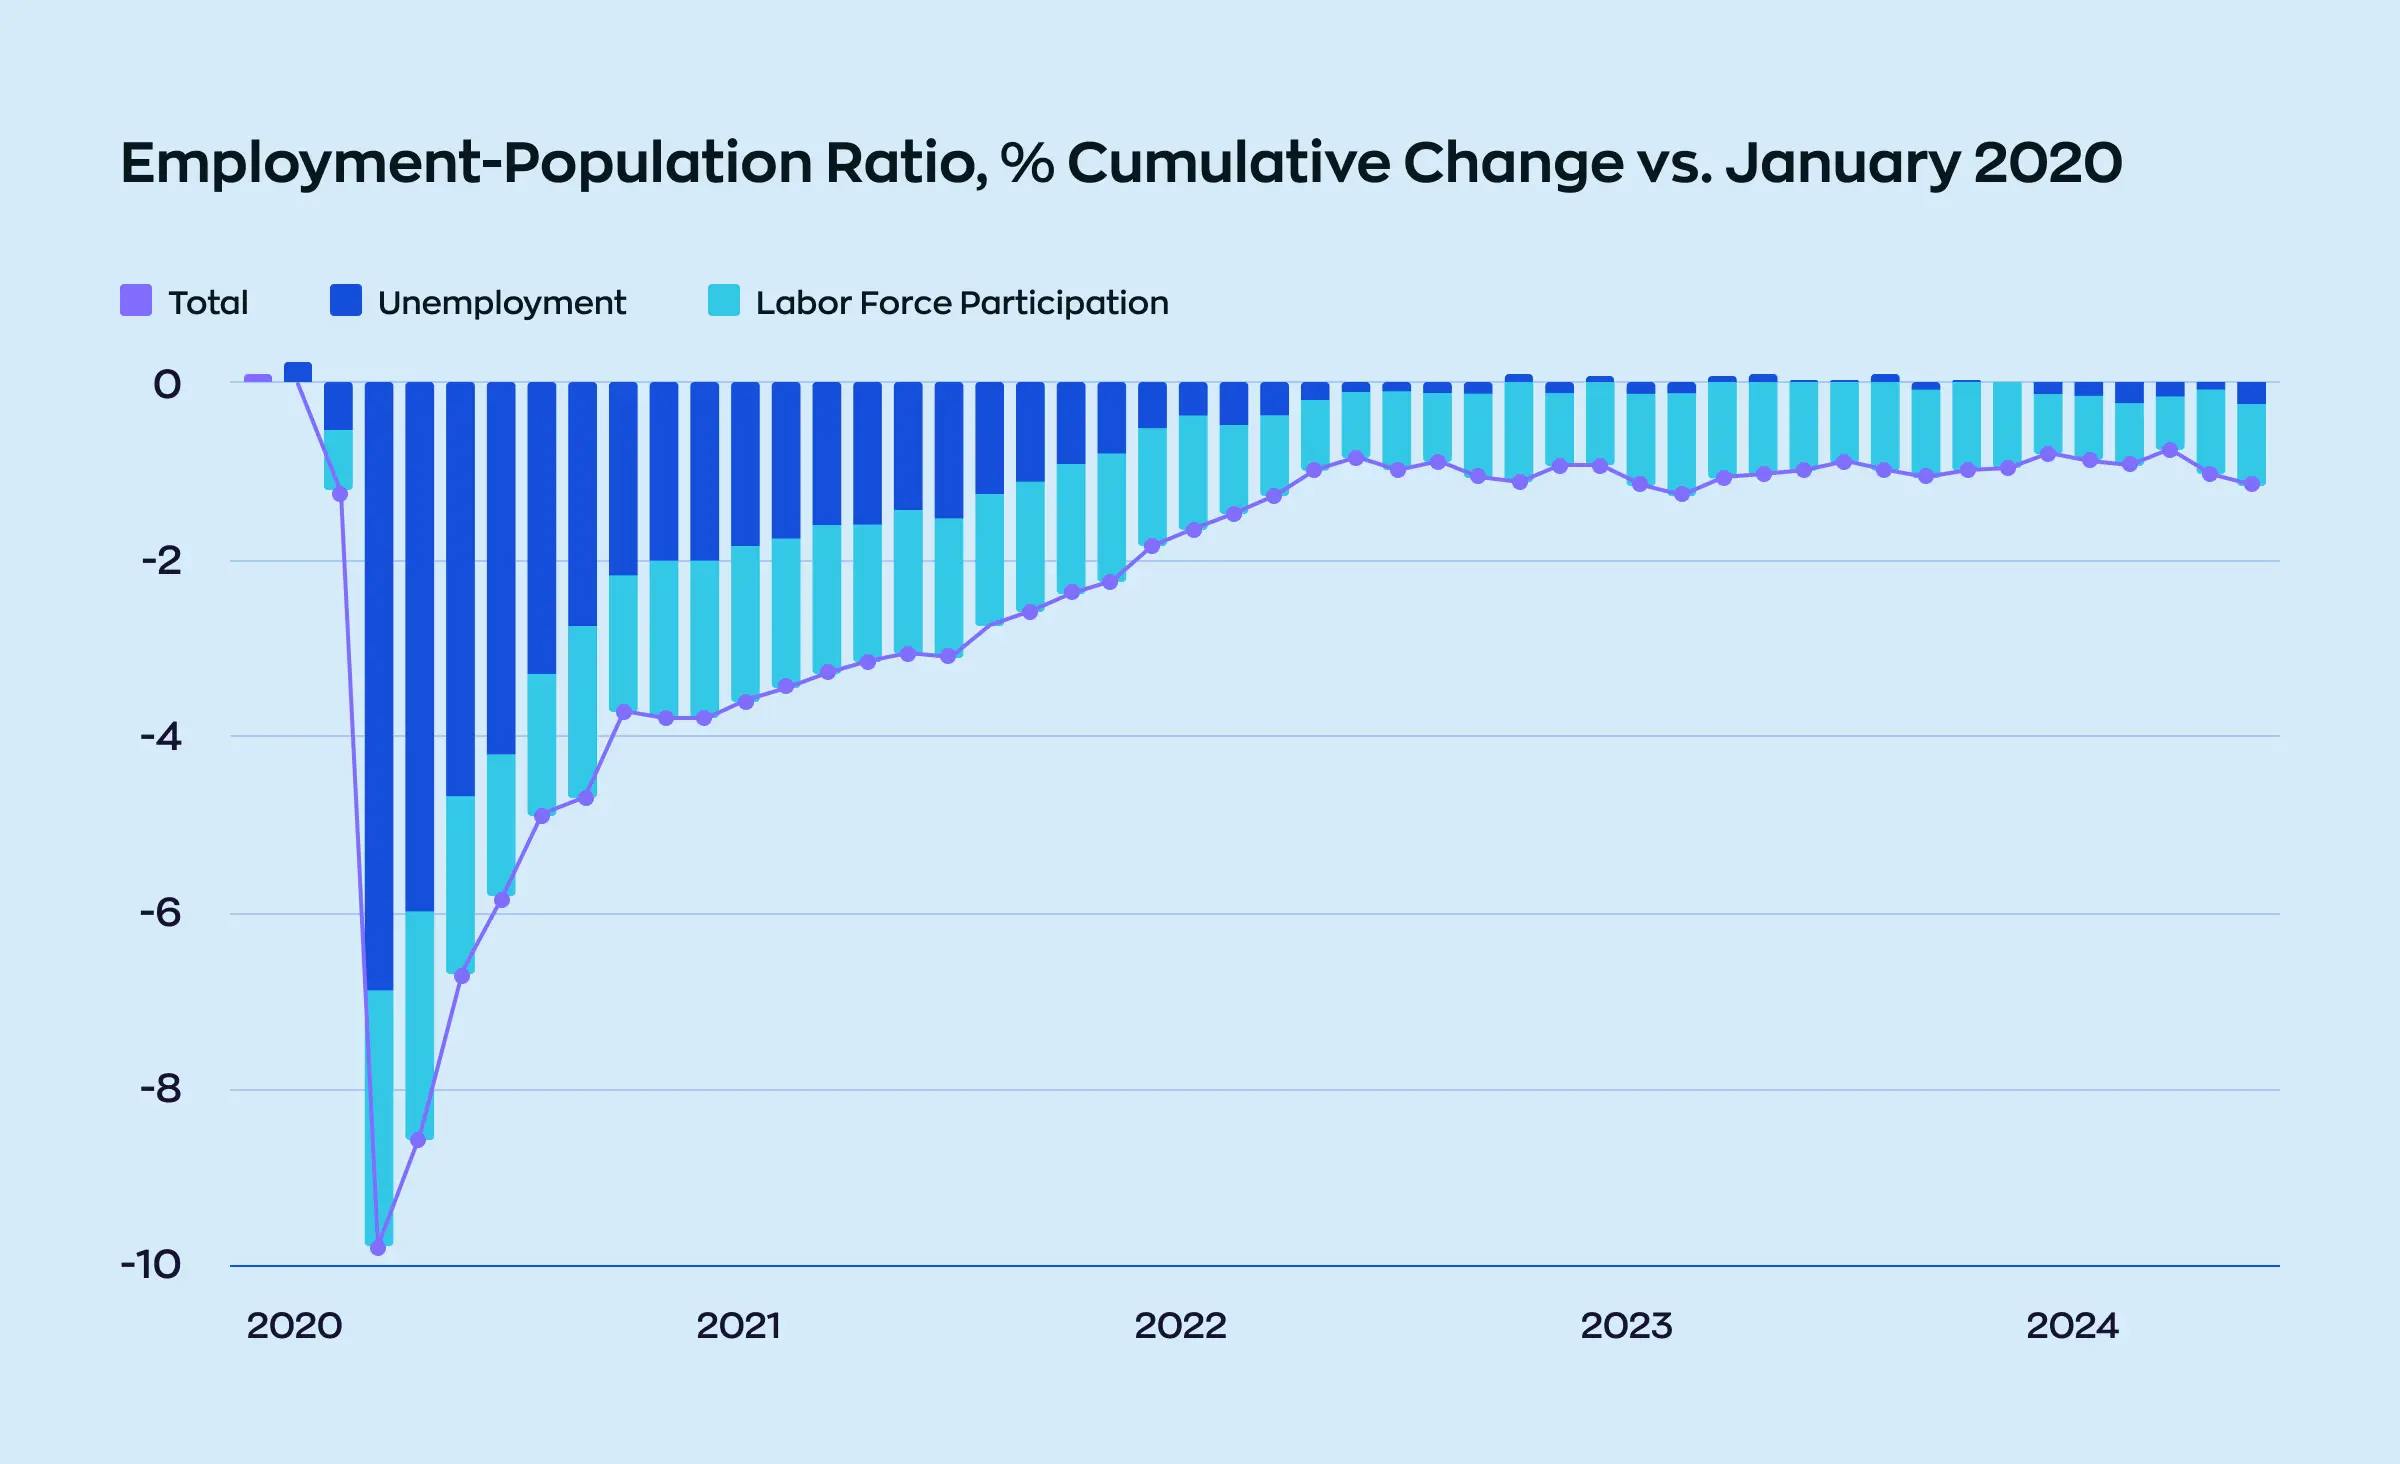 Statistics comparing the employment-population ratio as a percentage to January 2020.